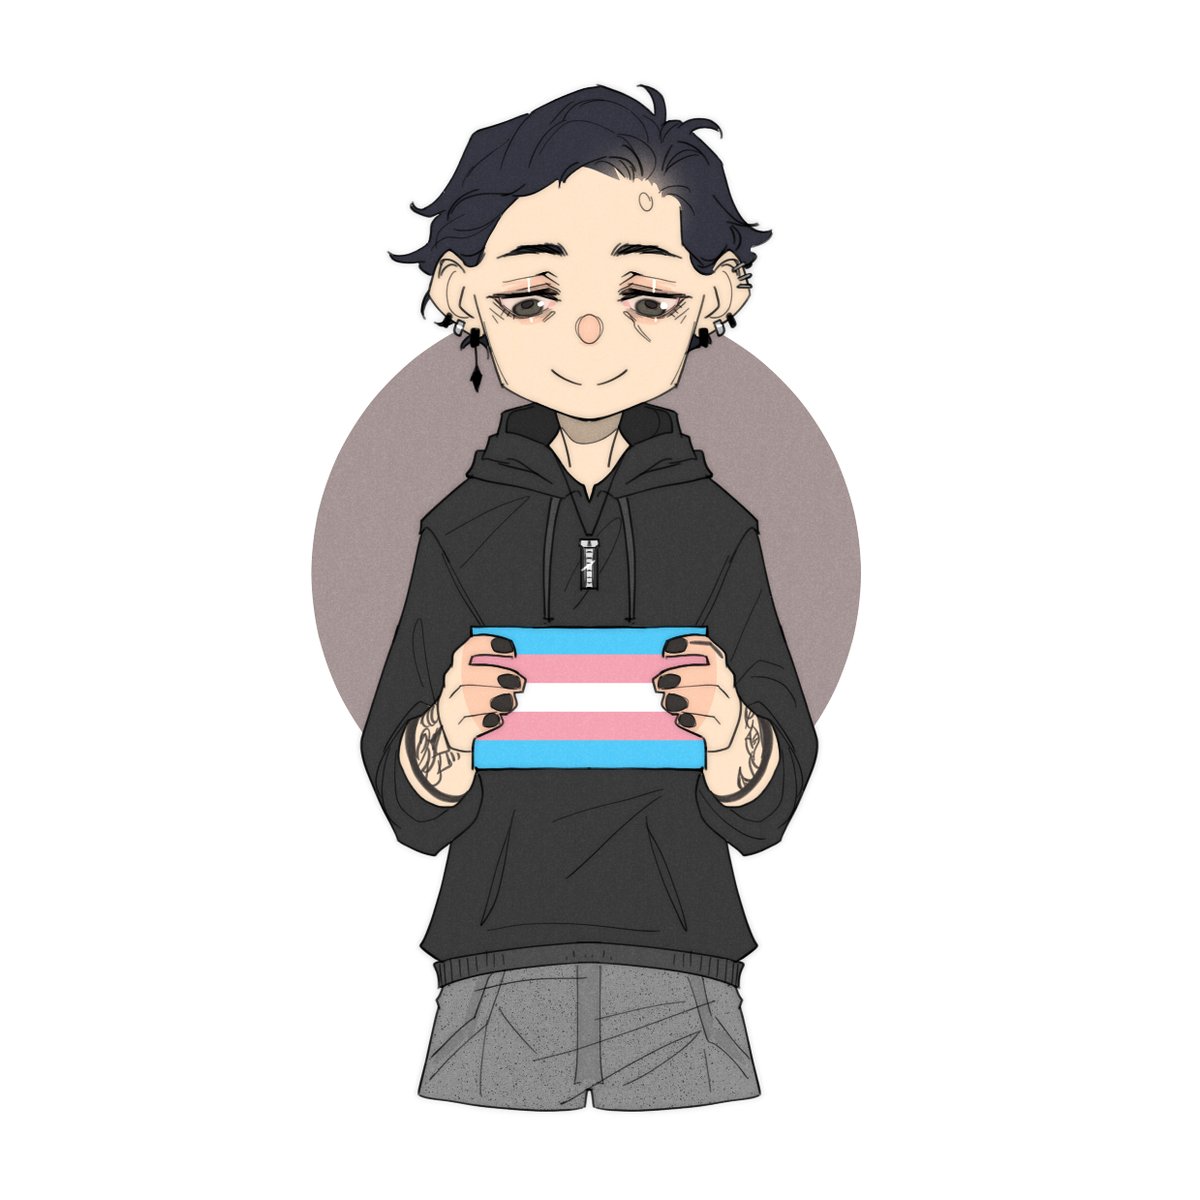 「happy (late) trans day of visibility, wa」|MAF @ tarot KSのイラスト